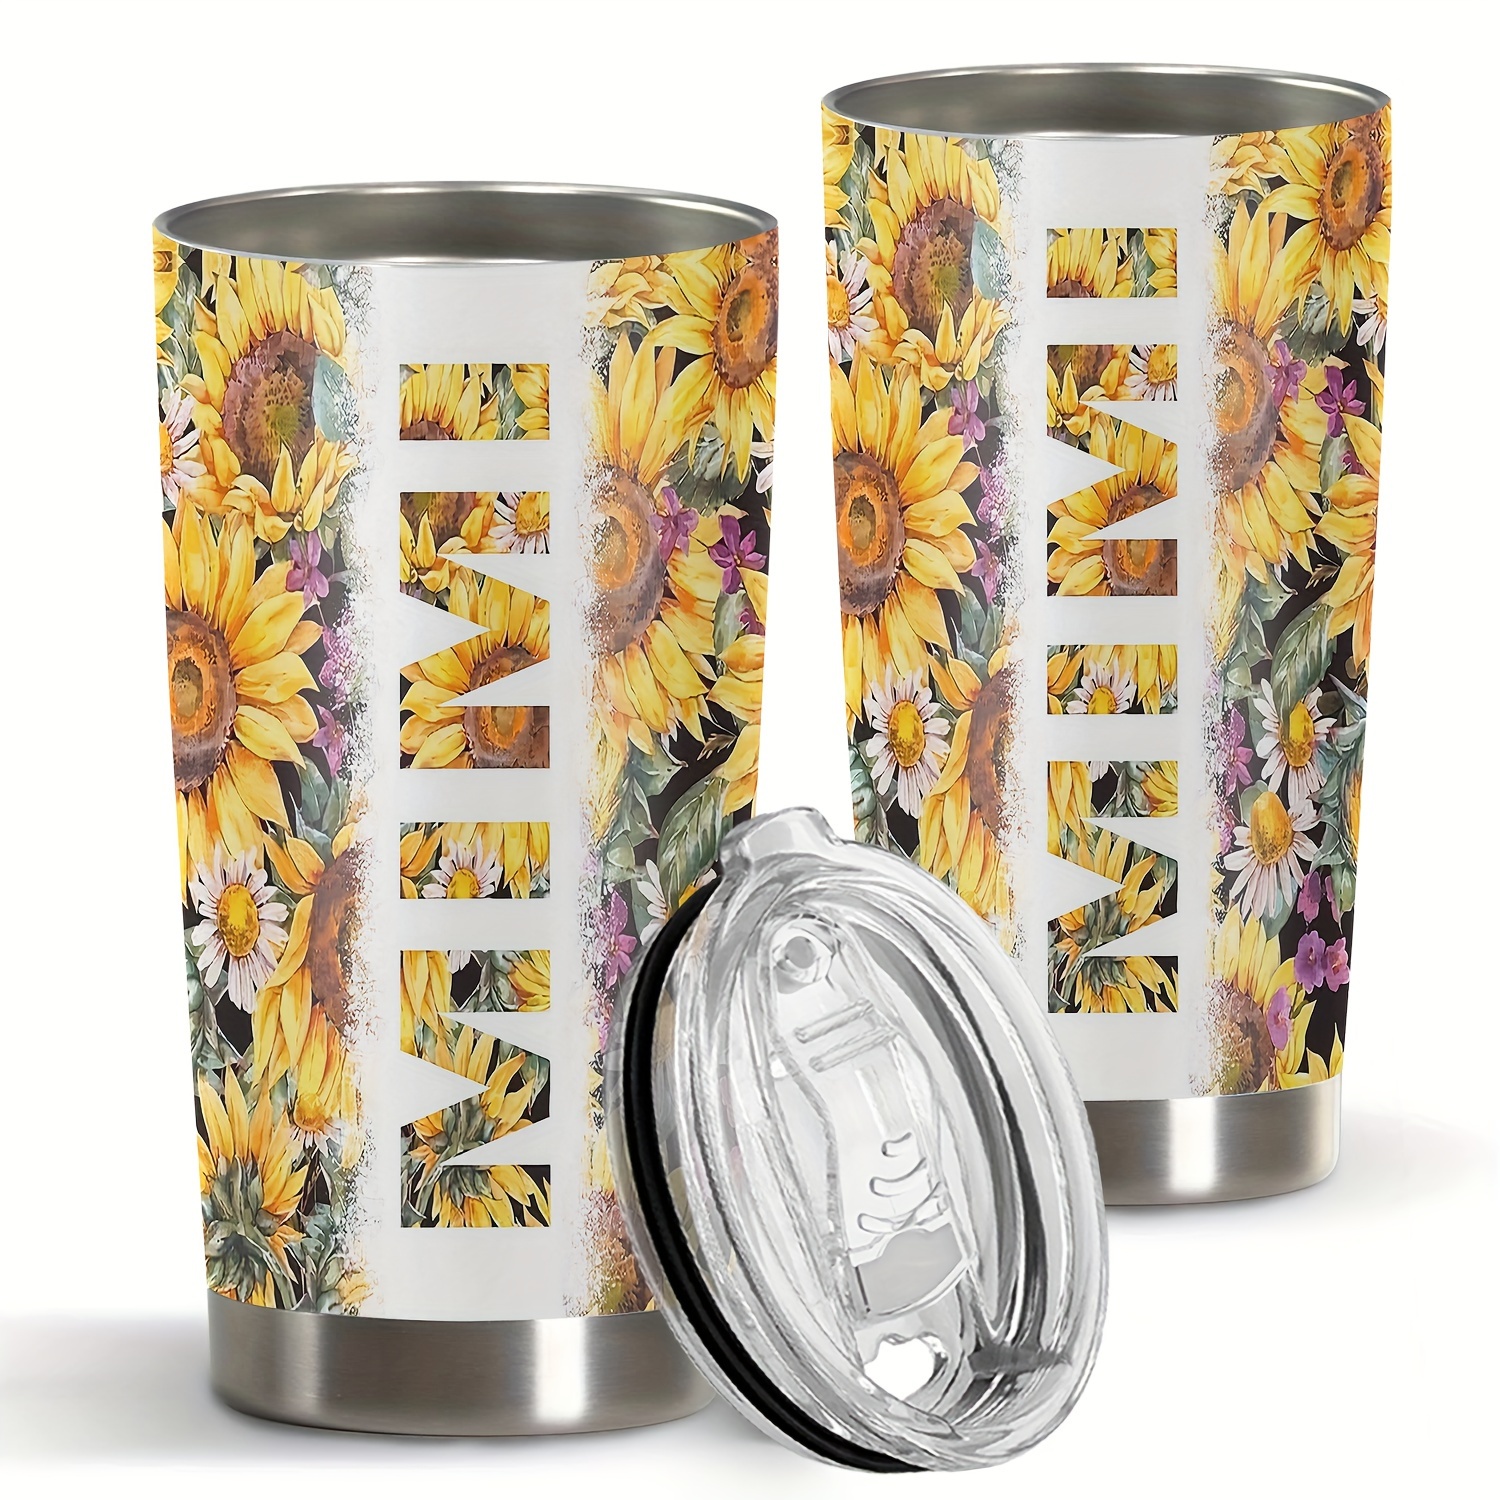 

1pc 20oz Sunflower Print Stainless Steel Tumbler With Sliding Lid, Mimi Funny Design, Double-wall Vacuum Insulated Travel Mug, Ideal Gift For Women, Mom, Sisters, Teachers, Coworkers